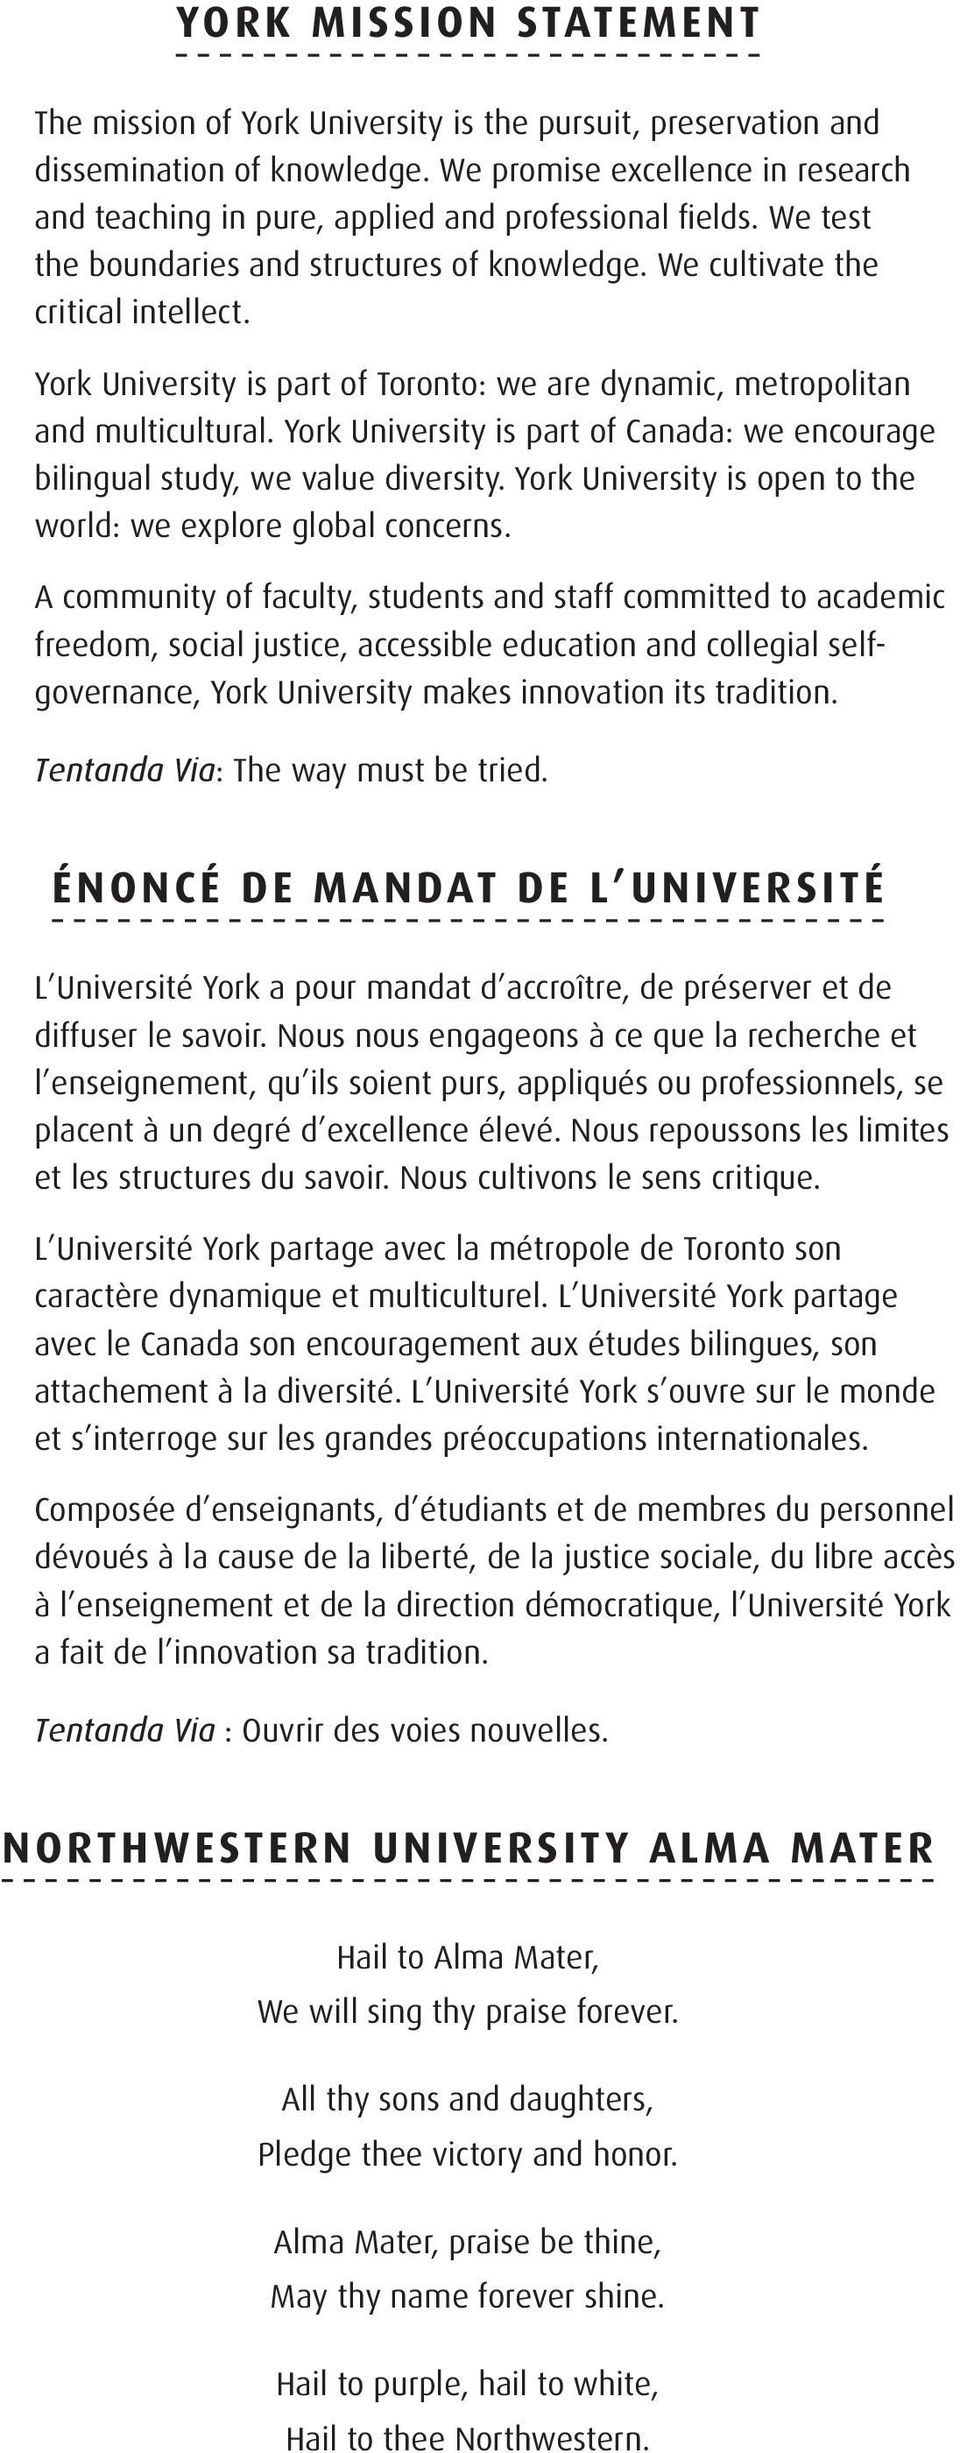 York University is part of Toronto: we are dynamic, metropolitan and multicultural. York University is part of Canada: we encourage bilingual study, we value diversity.